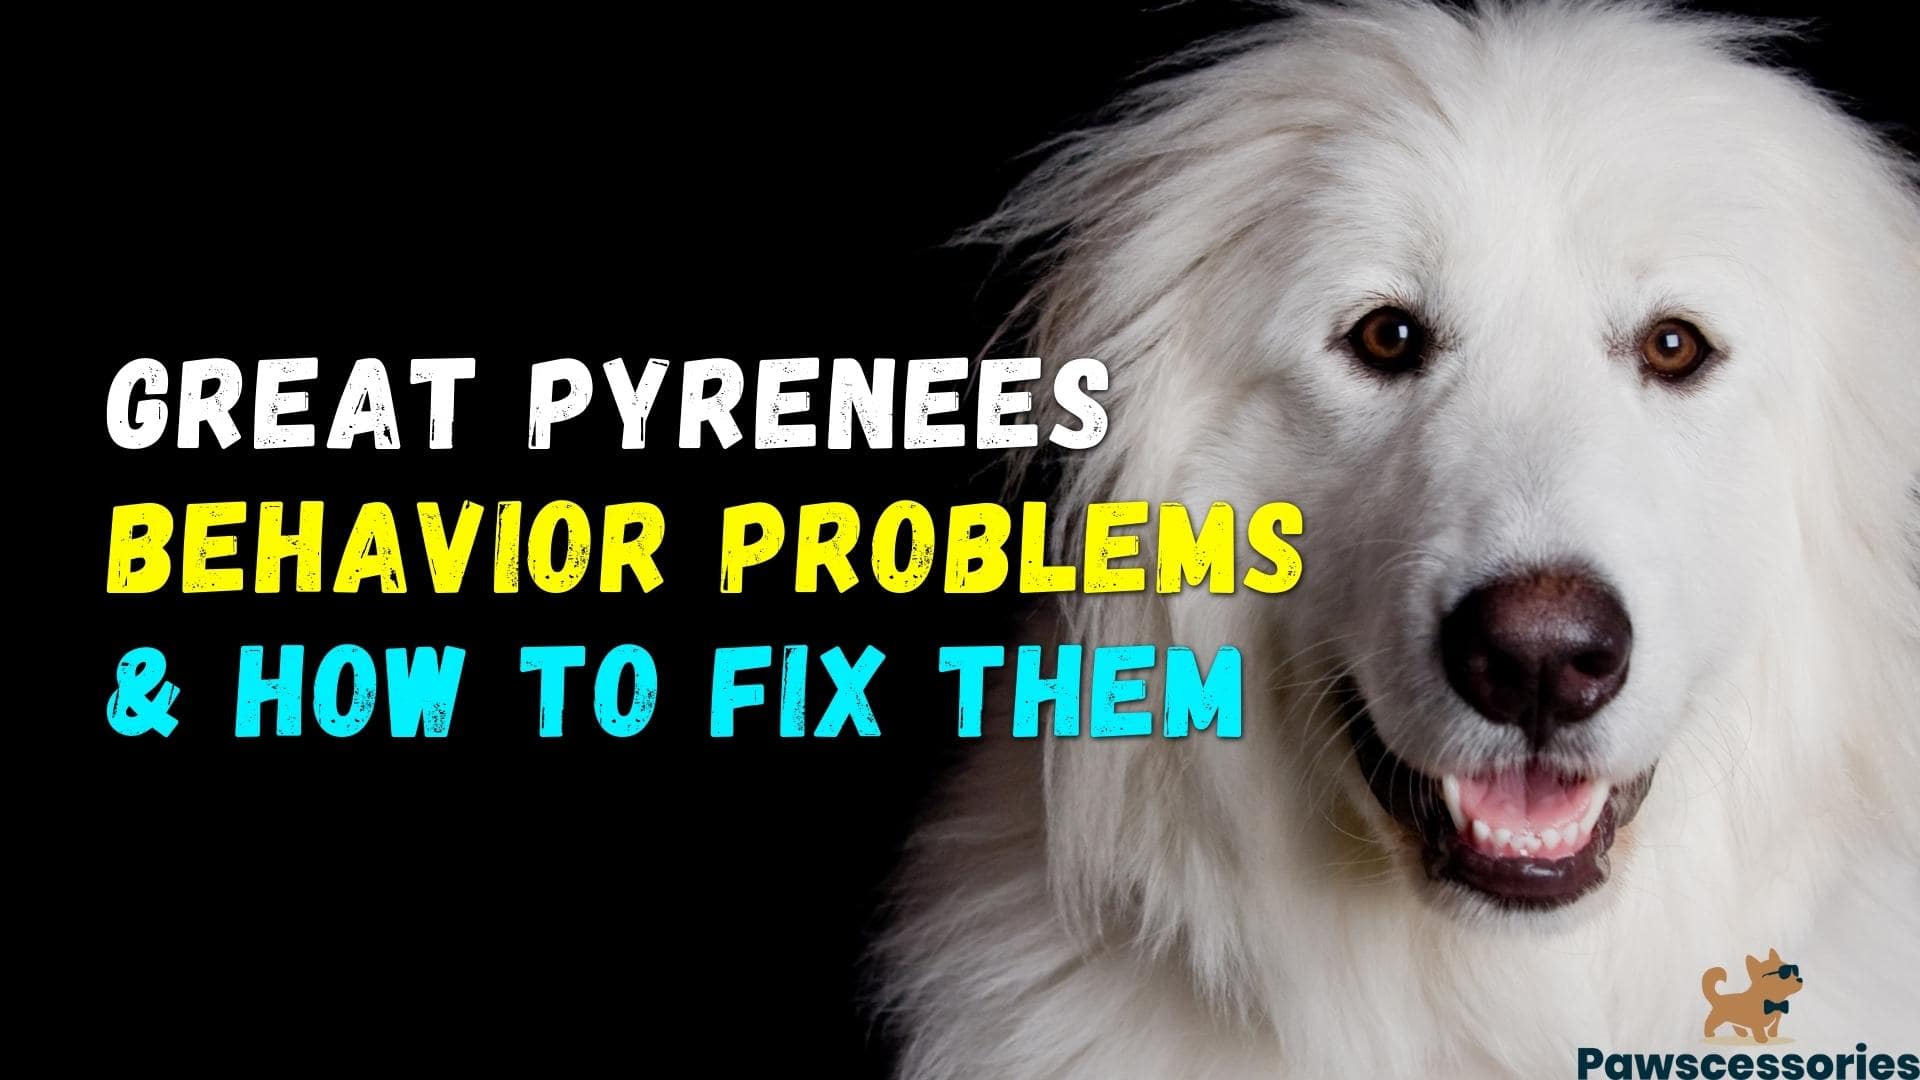 Great Pyrenees Behavior Problems & How To Handle Them